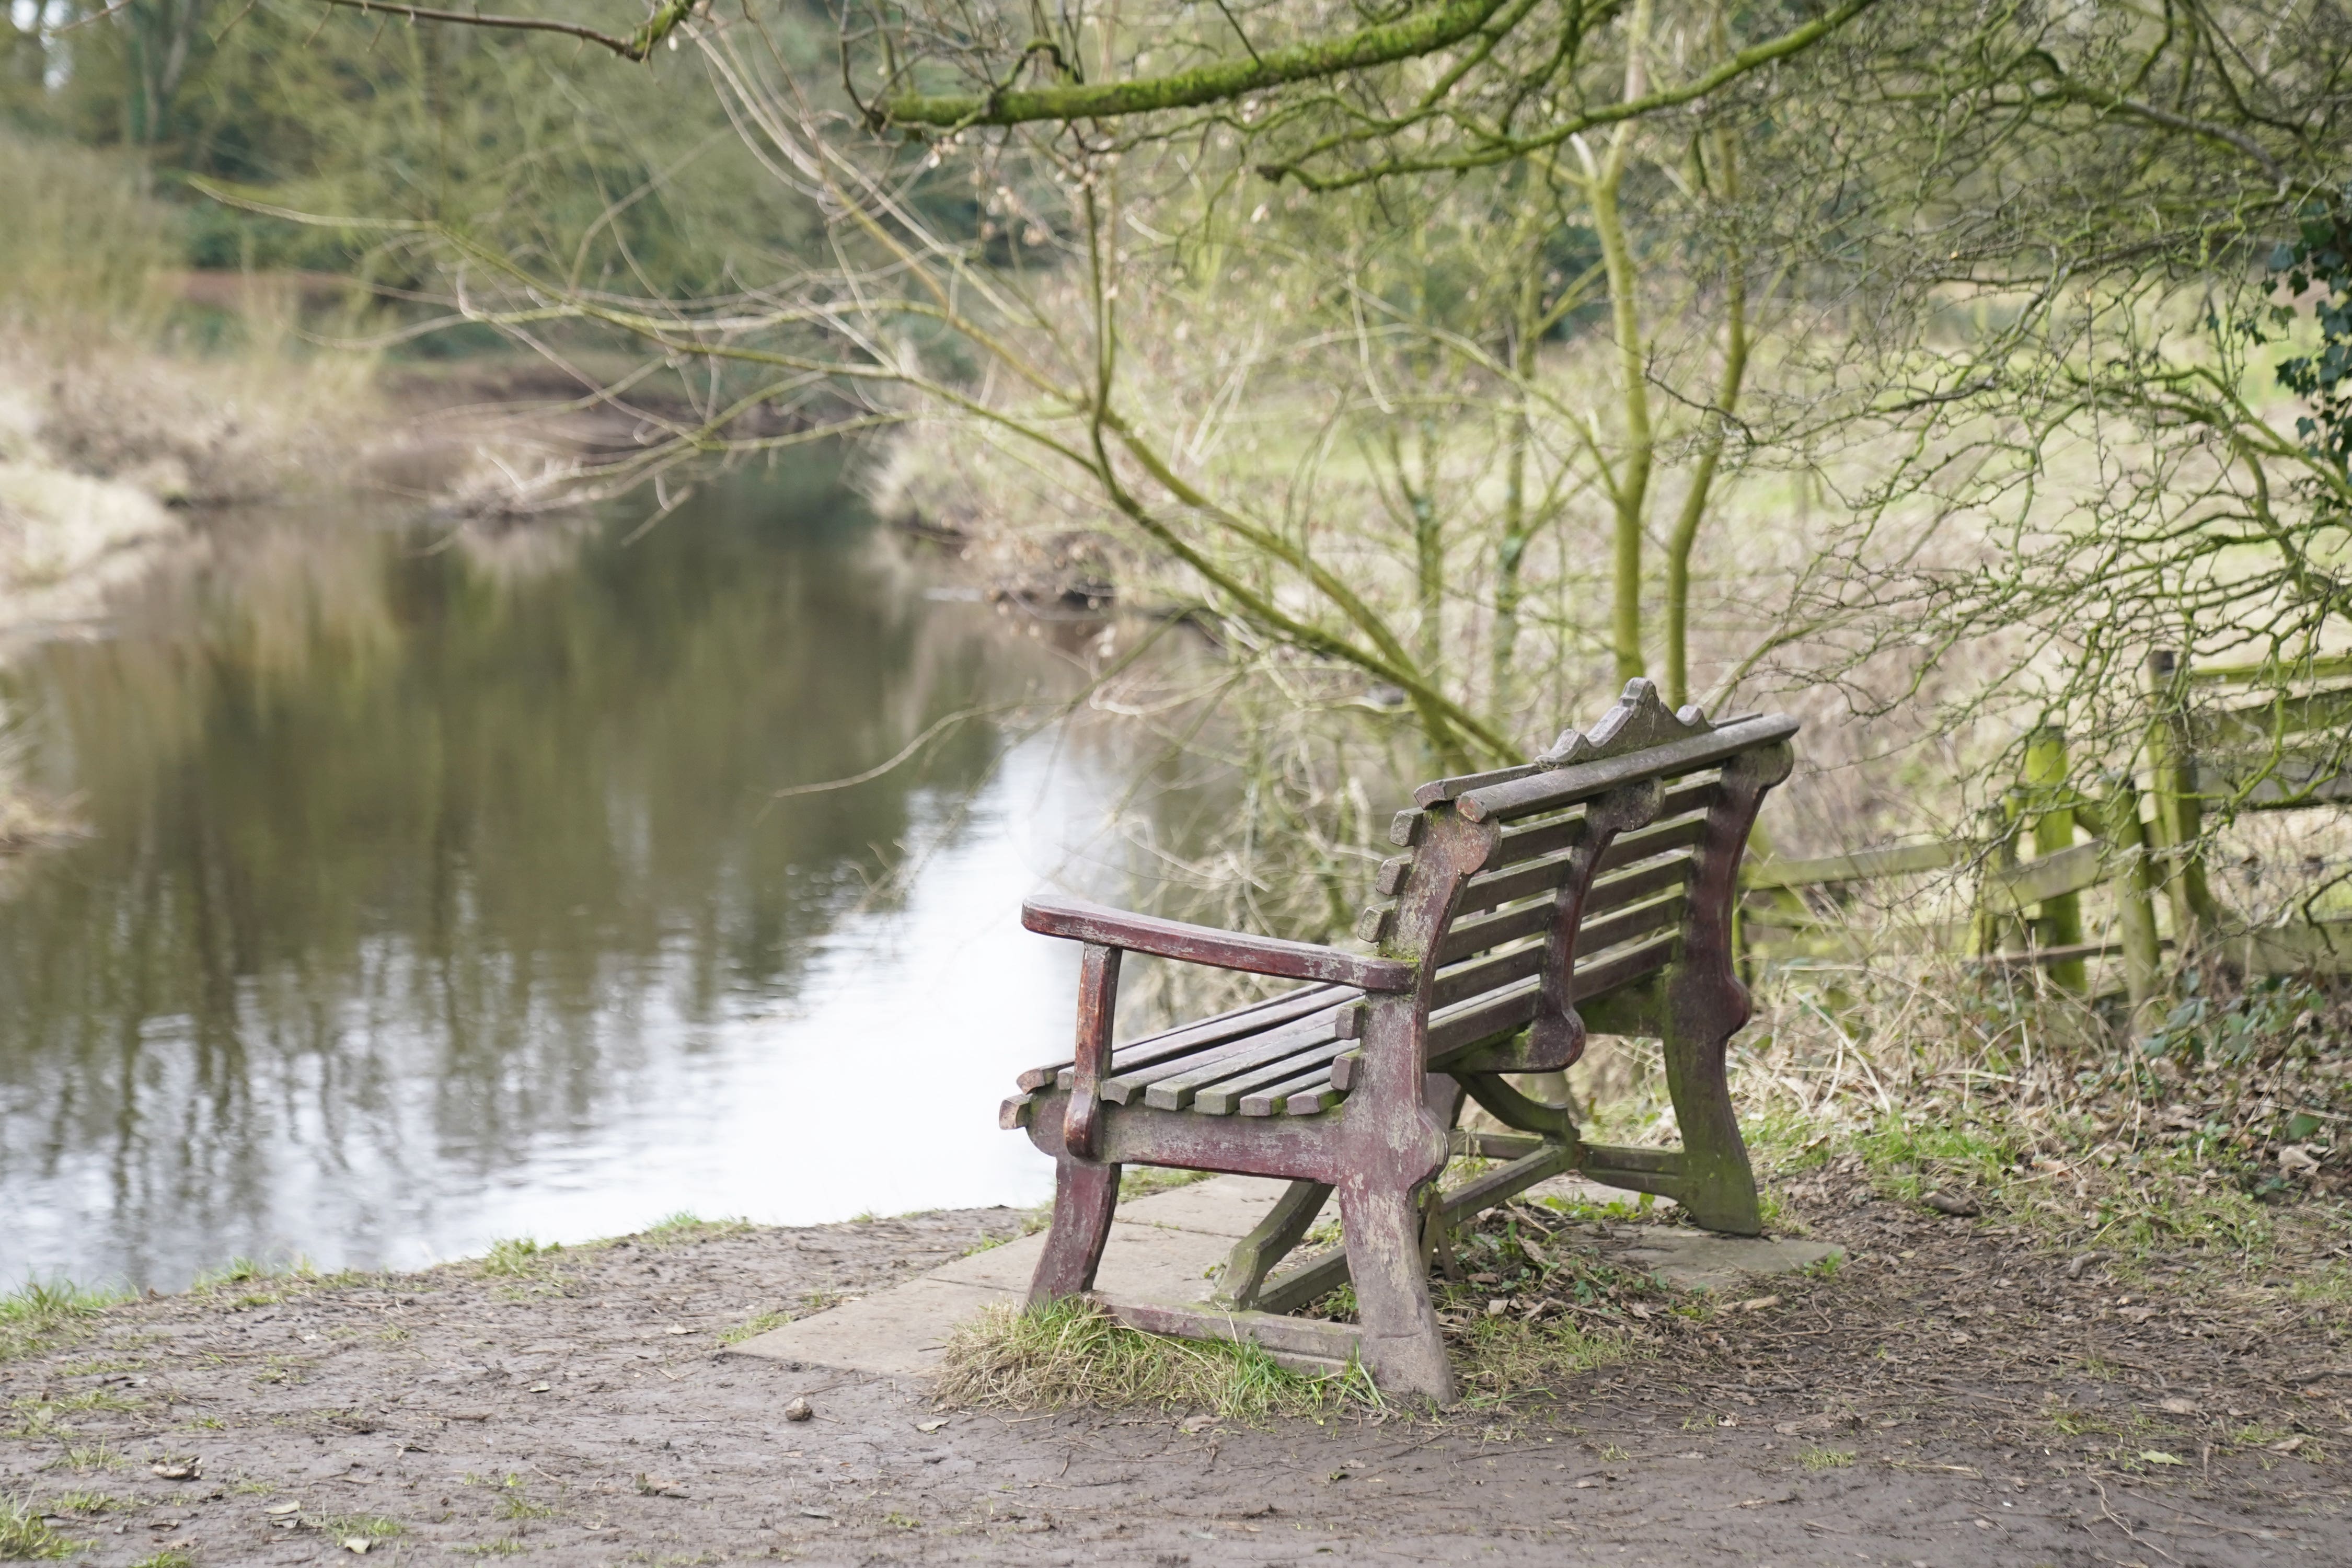 The bench where Ms Bulley’s phone was found, on the banks of the River Wyre in Lancashire